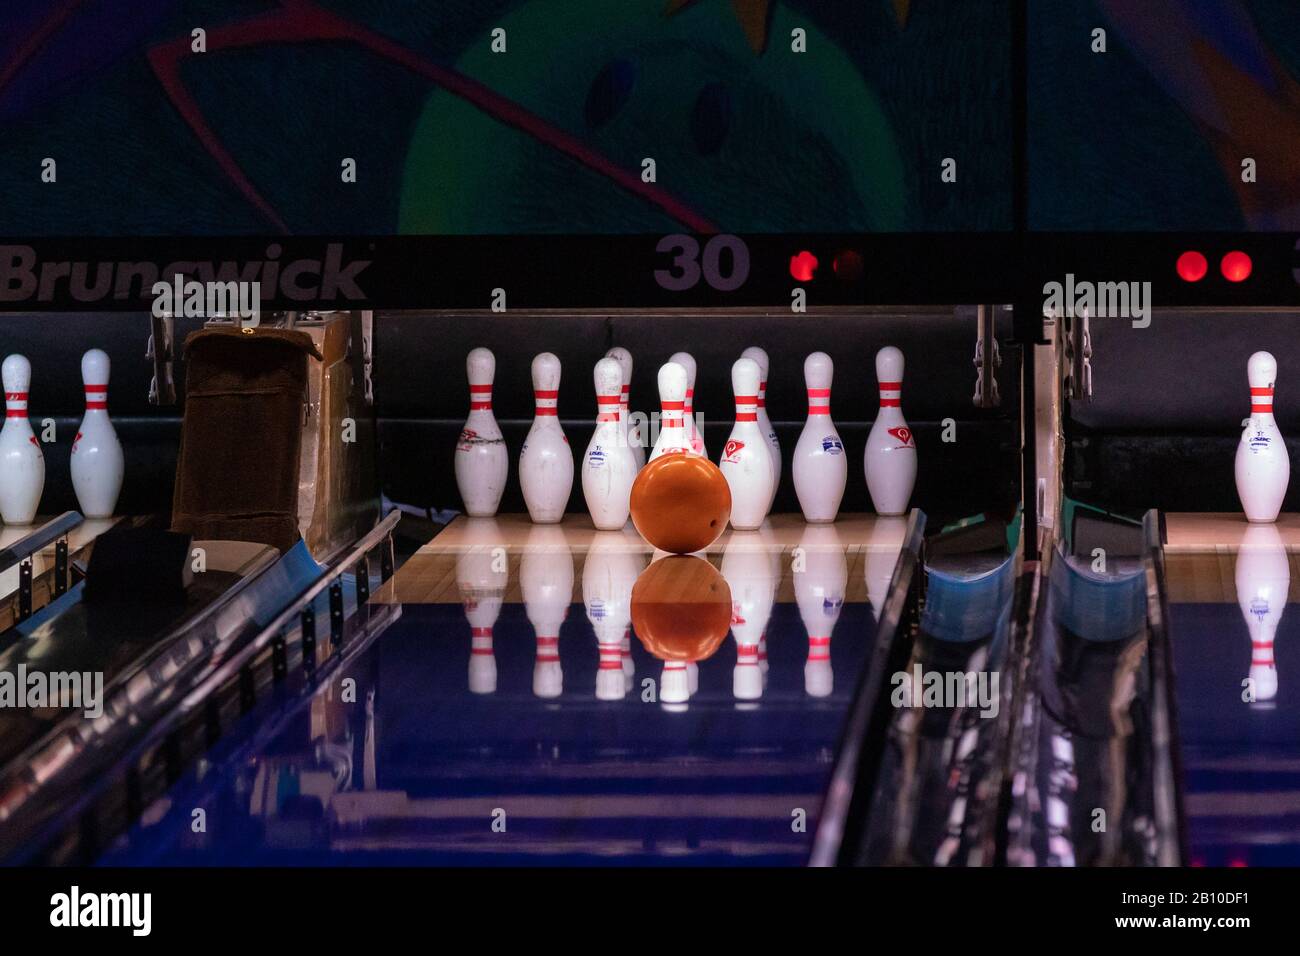 Hillsboro, Oregon  USA - March 16, 2019: Orange bowling ball is to hit the center of pins at the end of a bowling alley reflecting on a polished lane Stock Photo